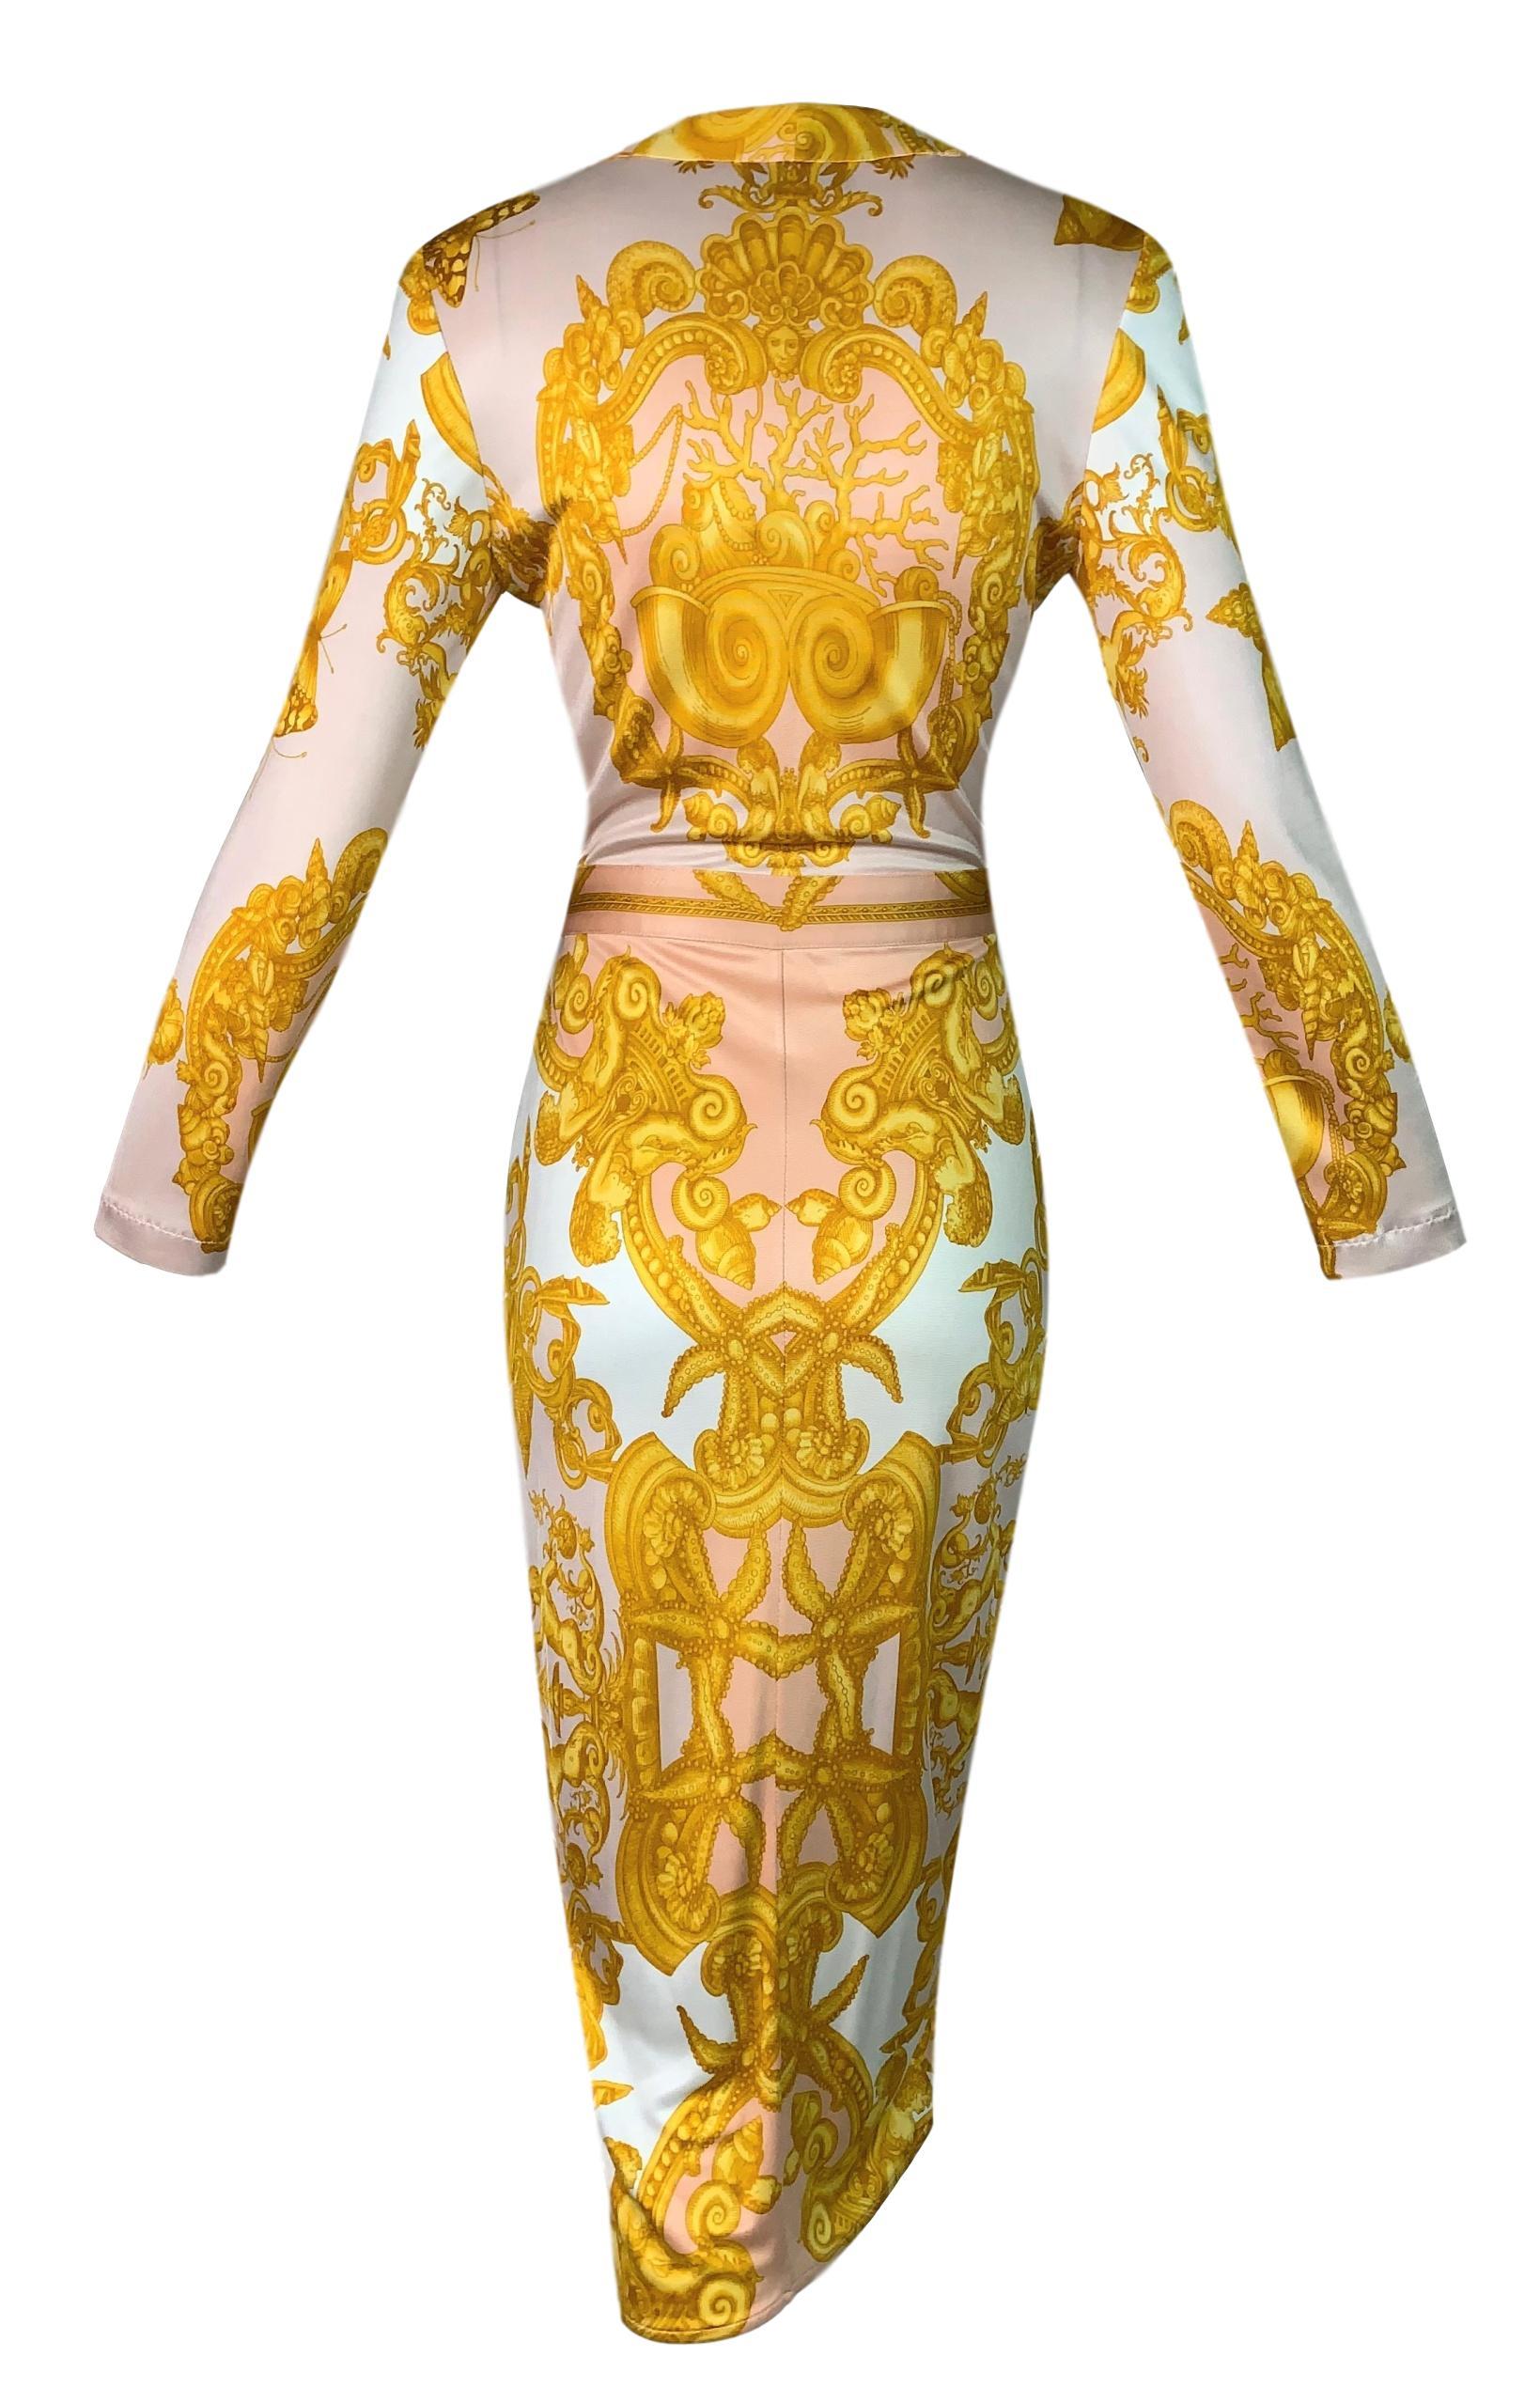 DESIGNER: S/S 2005 Versace runway

Please contact for more information and/or photos.

CONDITION: Good- This dress is unworn with partial tags attached but there is a minor pull in the fabric in an area that won't be seen as its under the front that